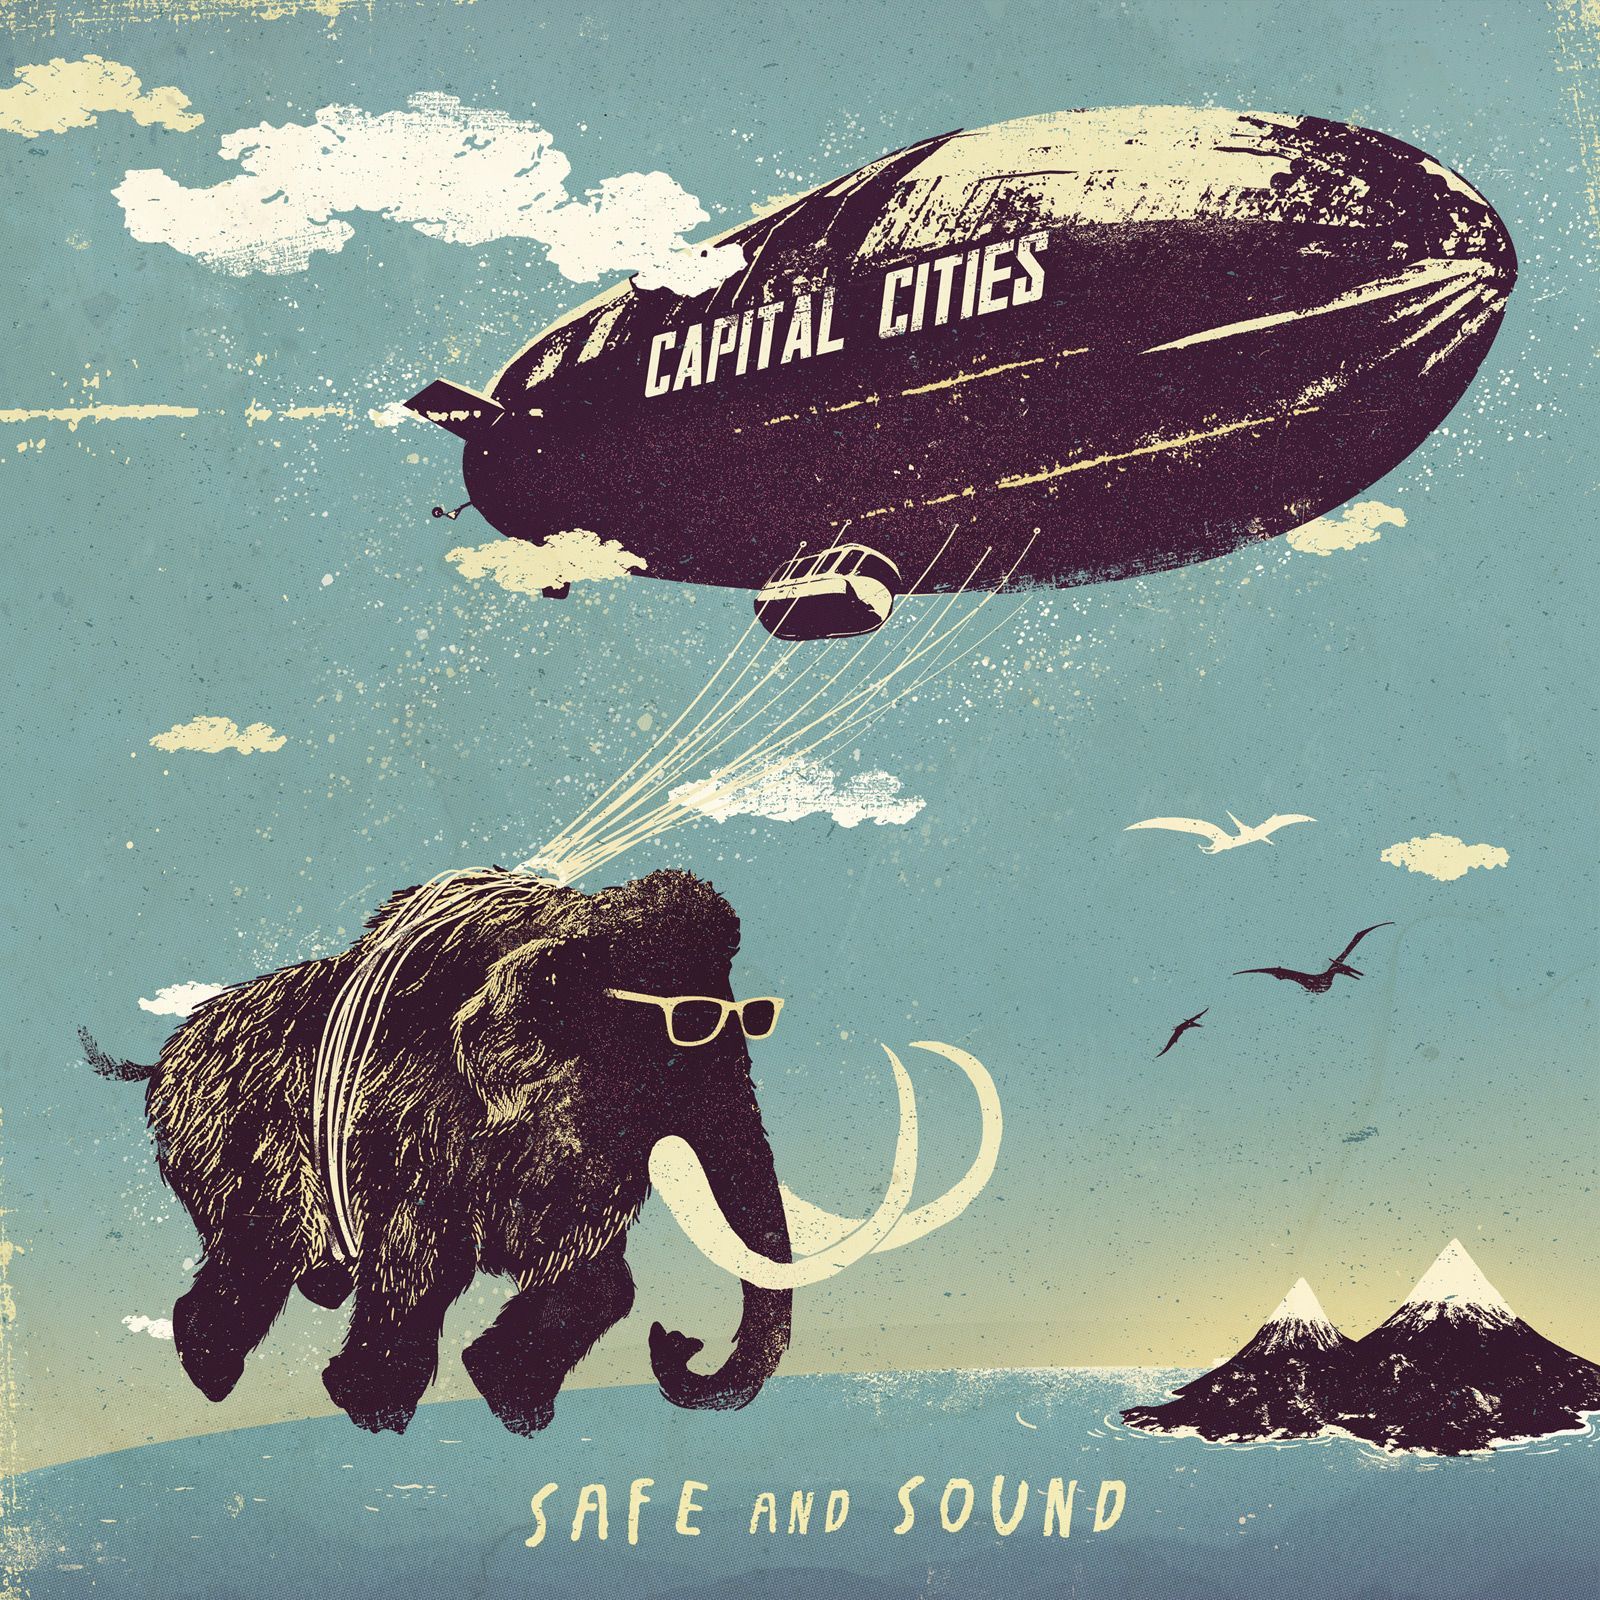 Safe and sound remix. Capital Cities обложка альбома. Safe and Sound от Capital Cities. Safe and Sound Capital обложка. Capital Cities safe and Sound альбом.